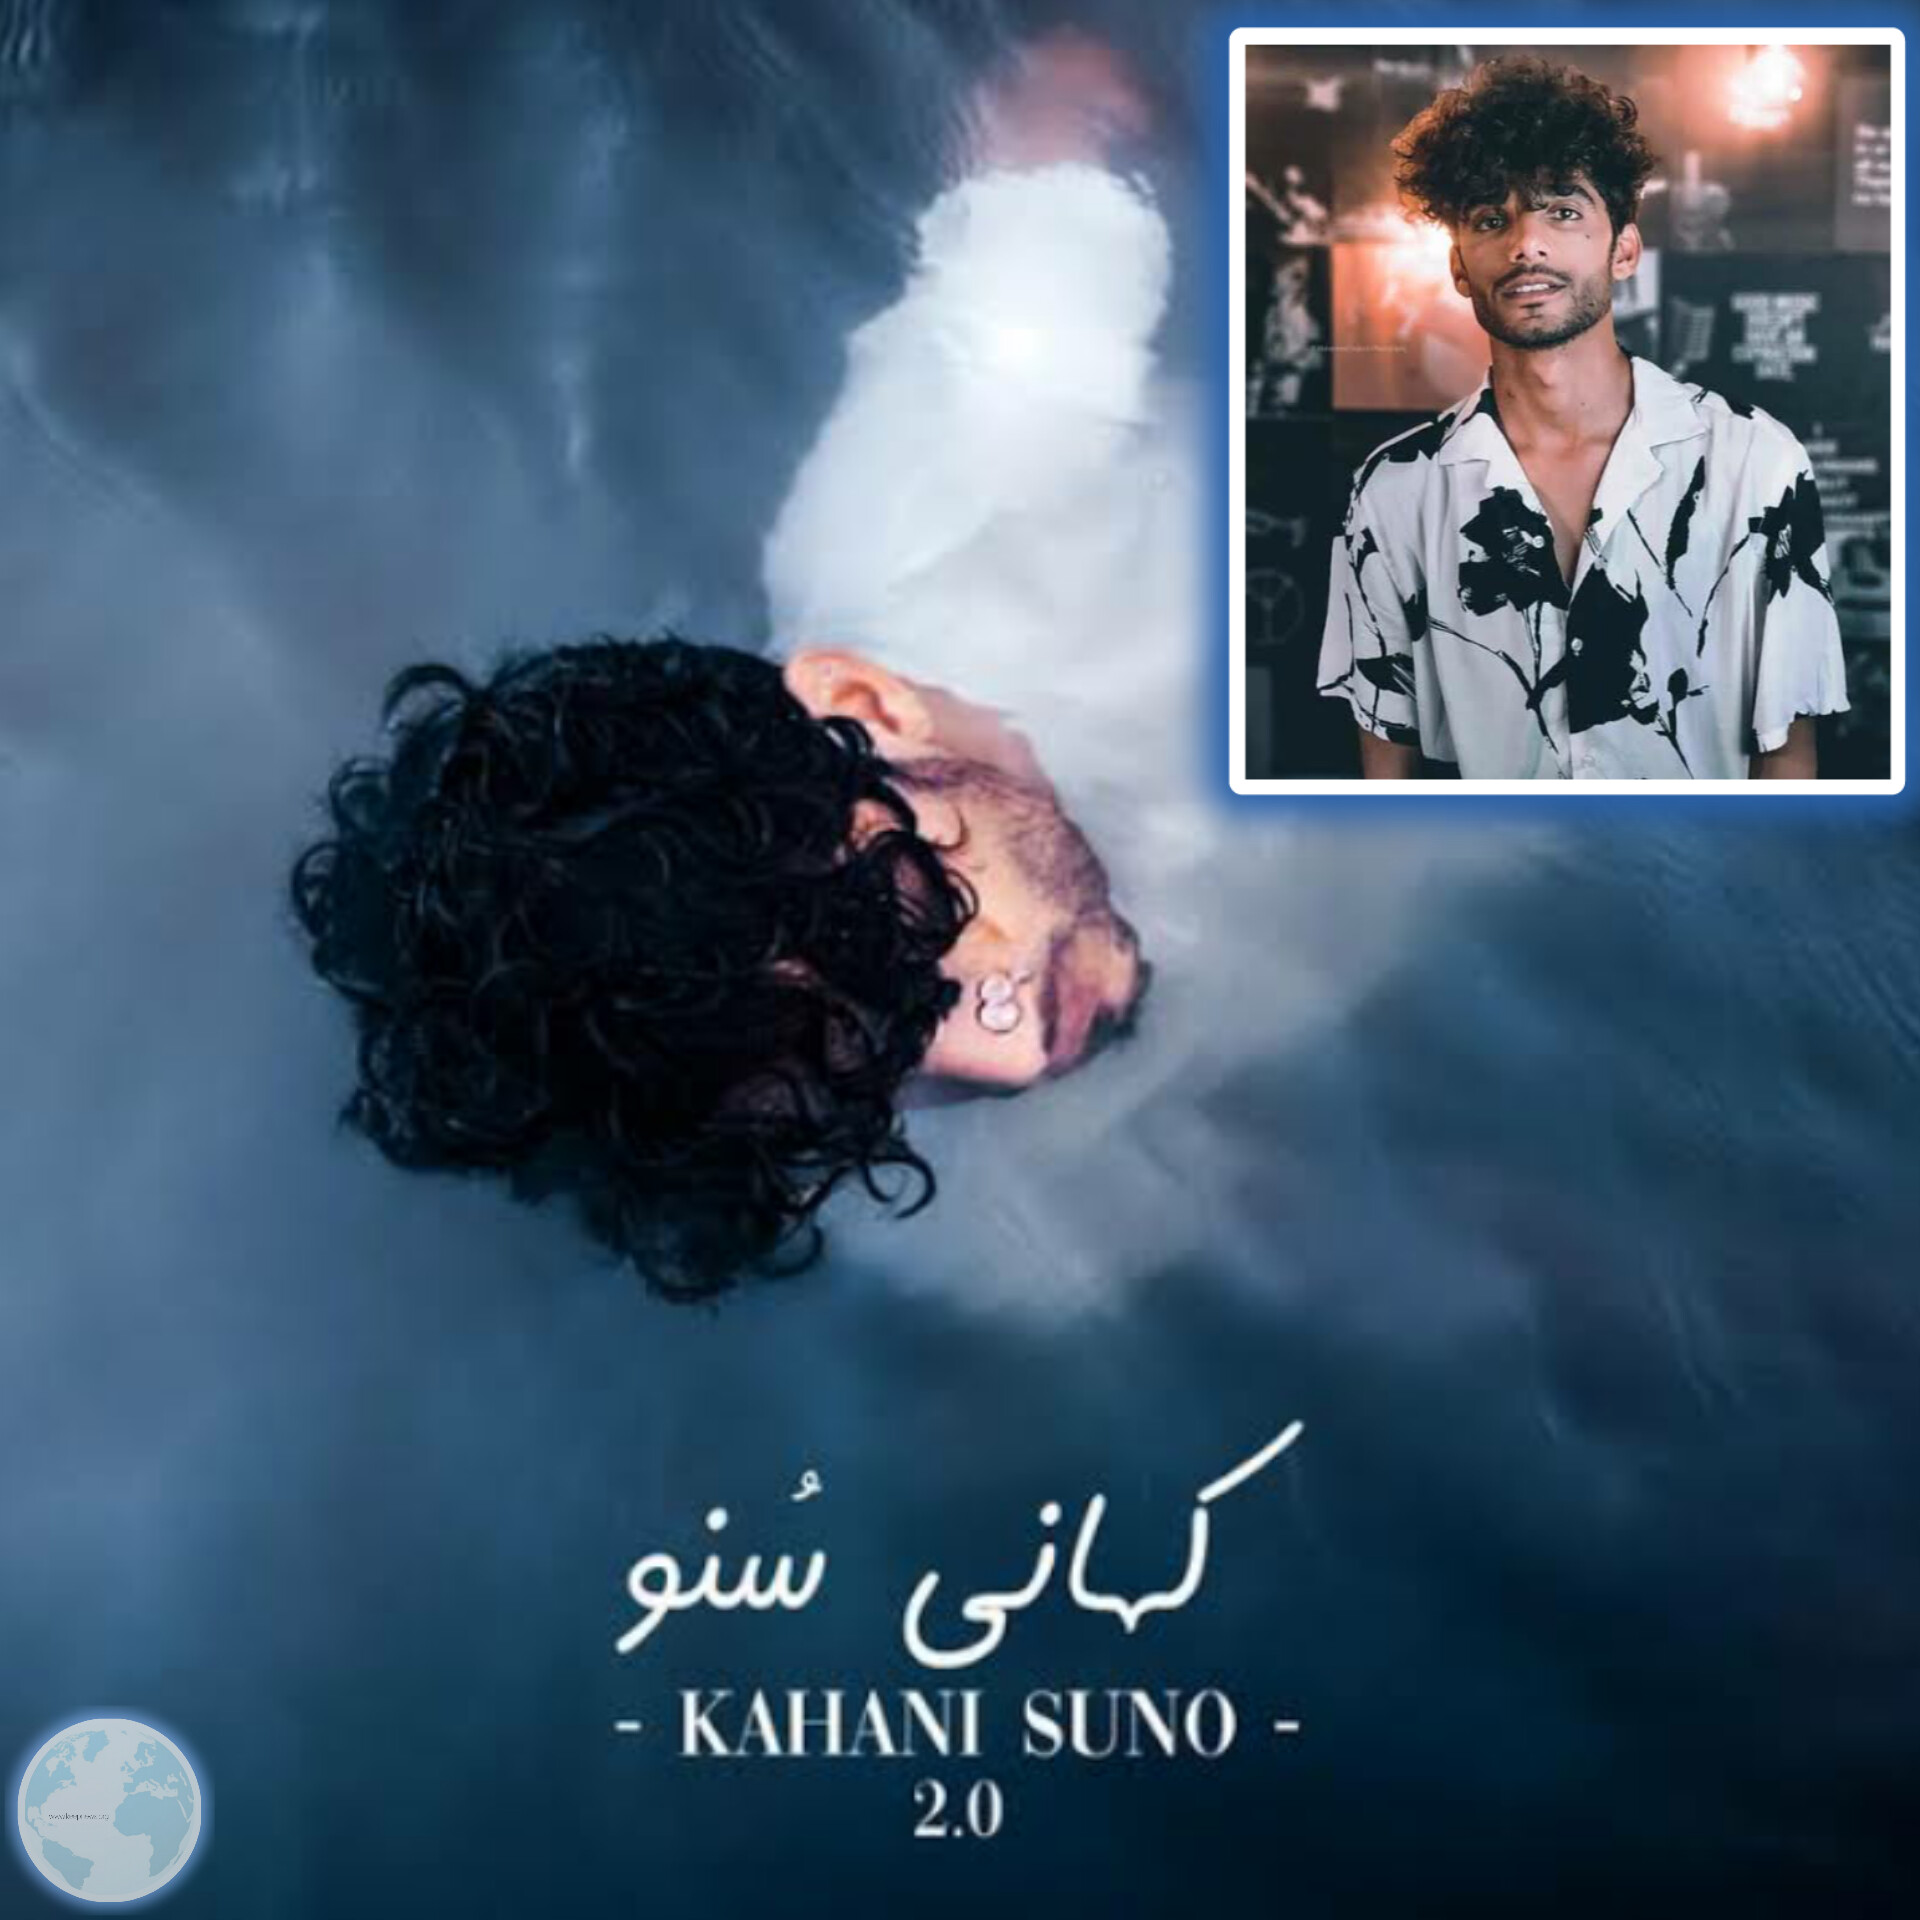 Kaifi Khalil's Song "Kahani Suno" has been Viewed more than 60 Million times on YouTube